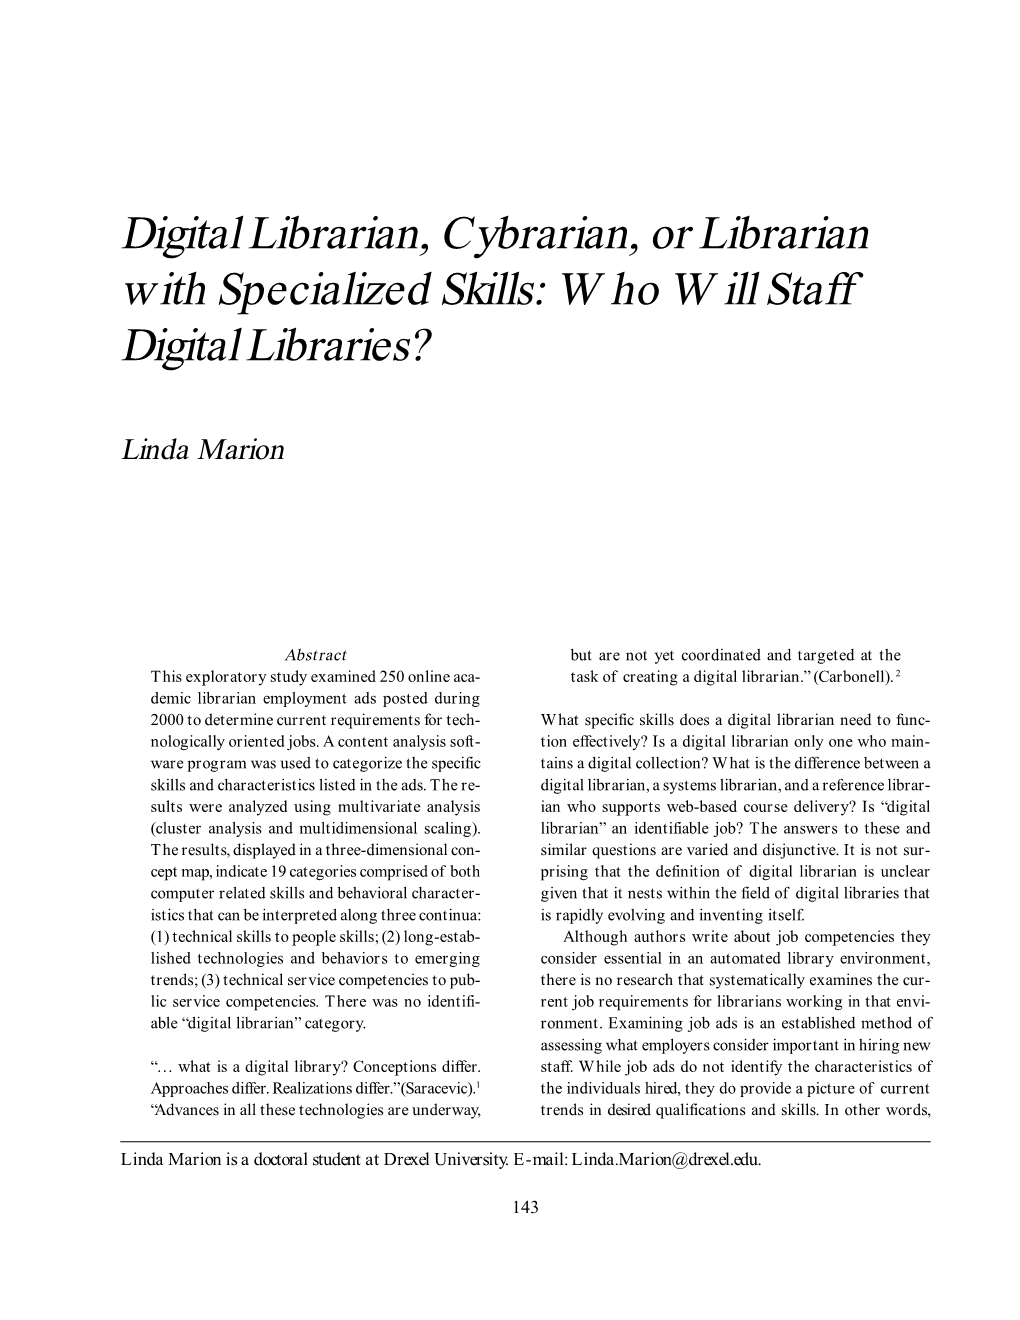 Digital Librarian, Cybrarian, Or Librarian with Specialized Skills 143